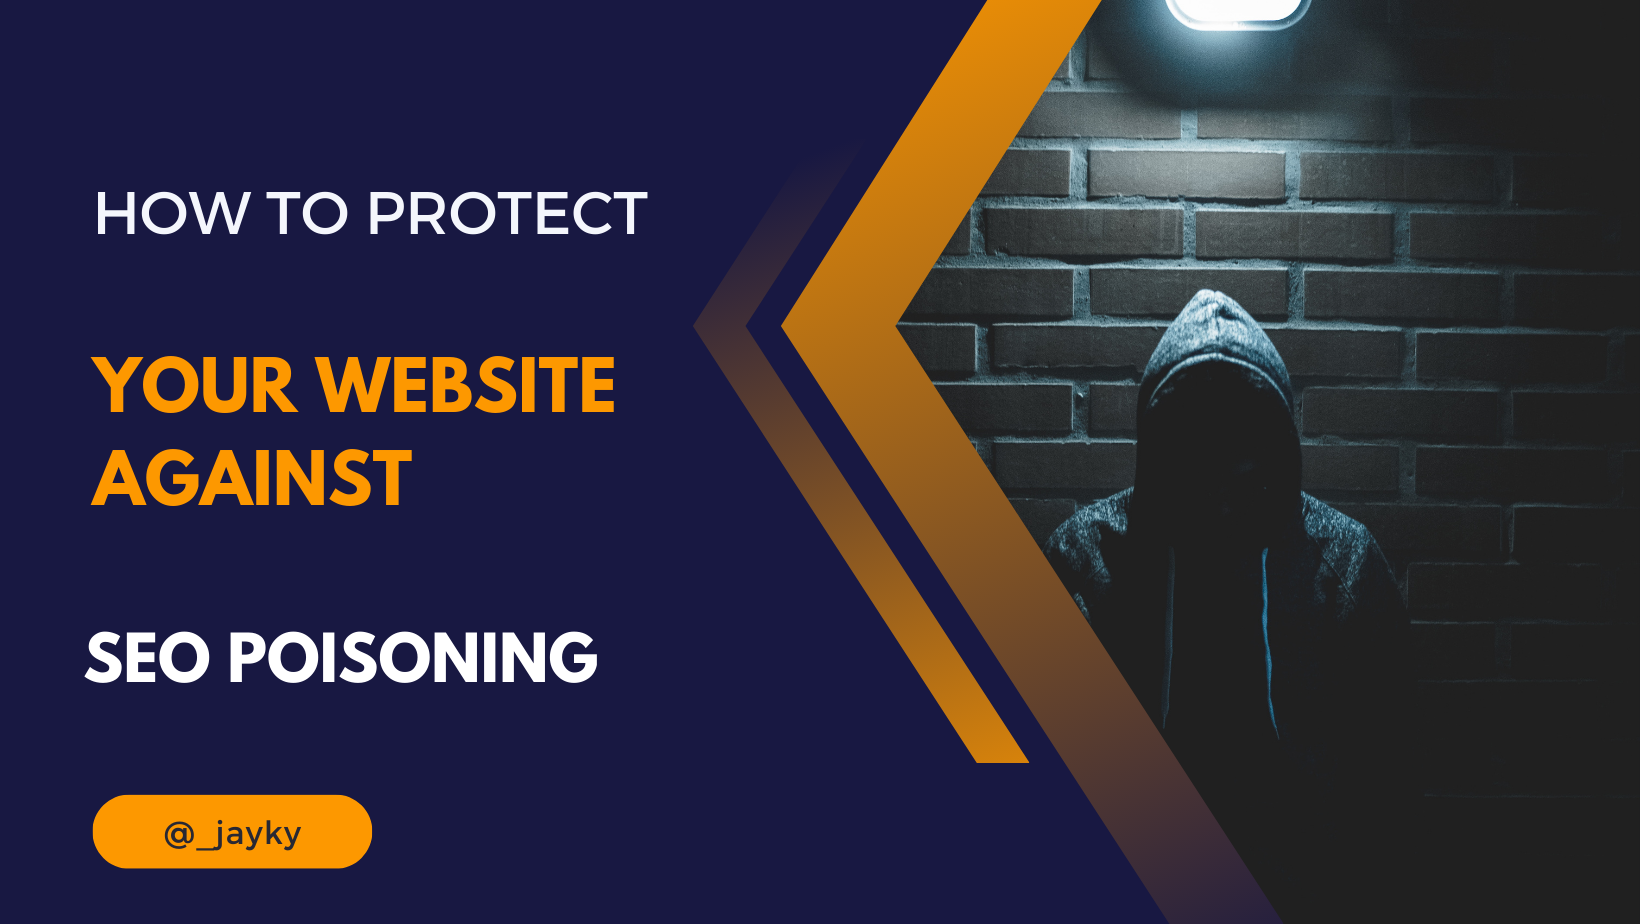 How to Protect Your Website Against SEO Poisoning